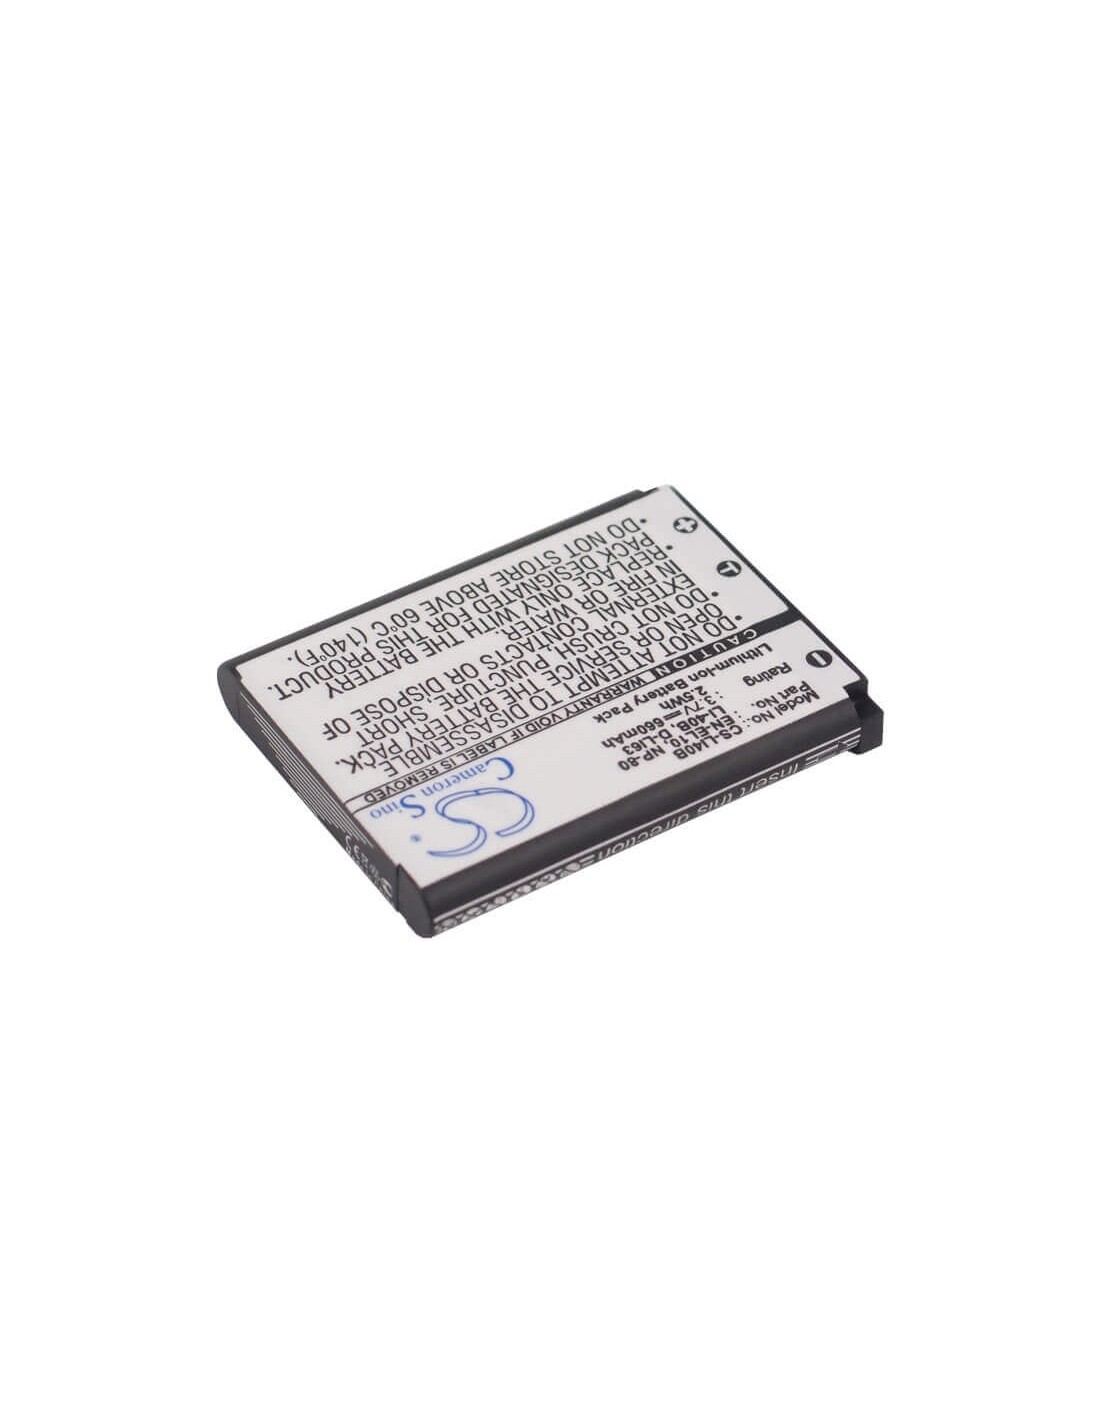 Battery for Goclever Dvr Extreme Silver, Extreme 3.7V, 660mAh - 2.44Wh